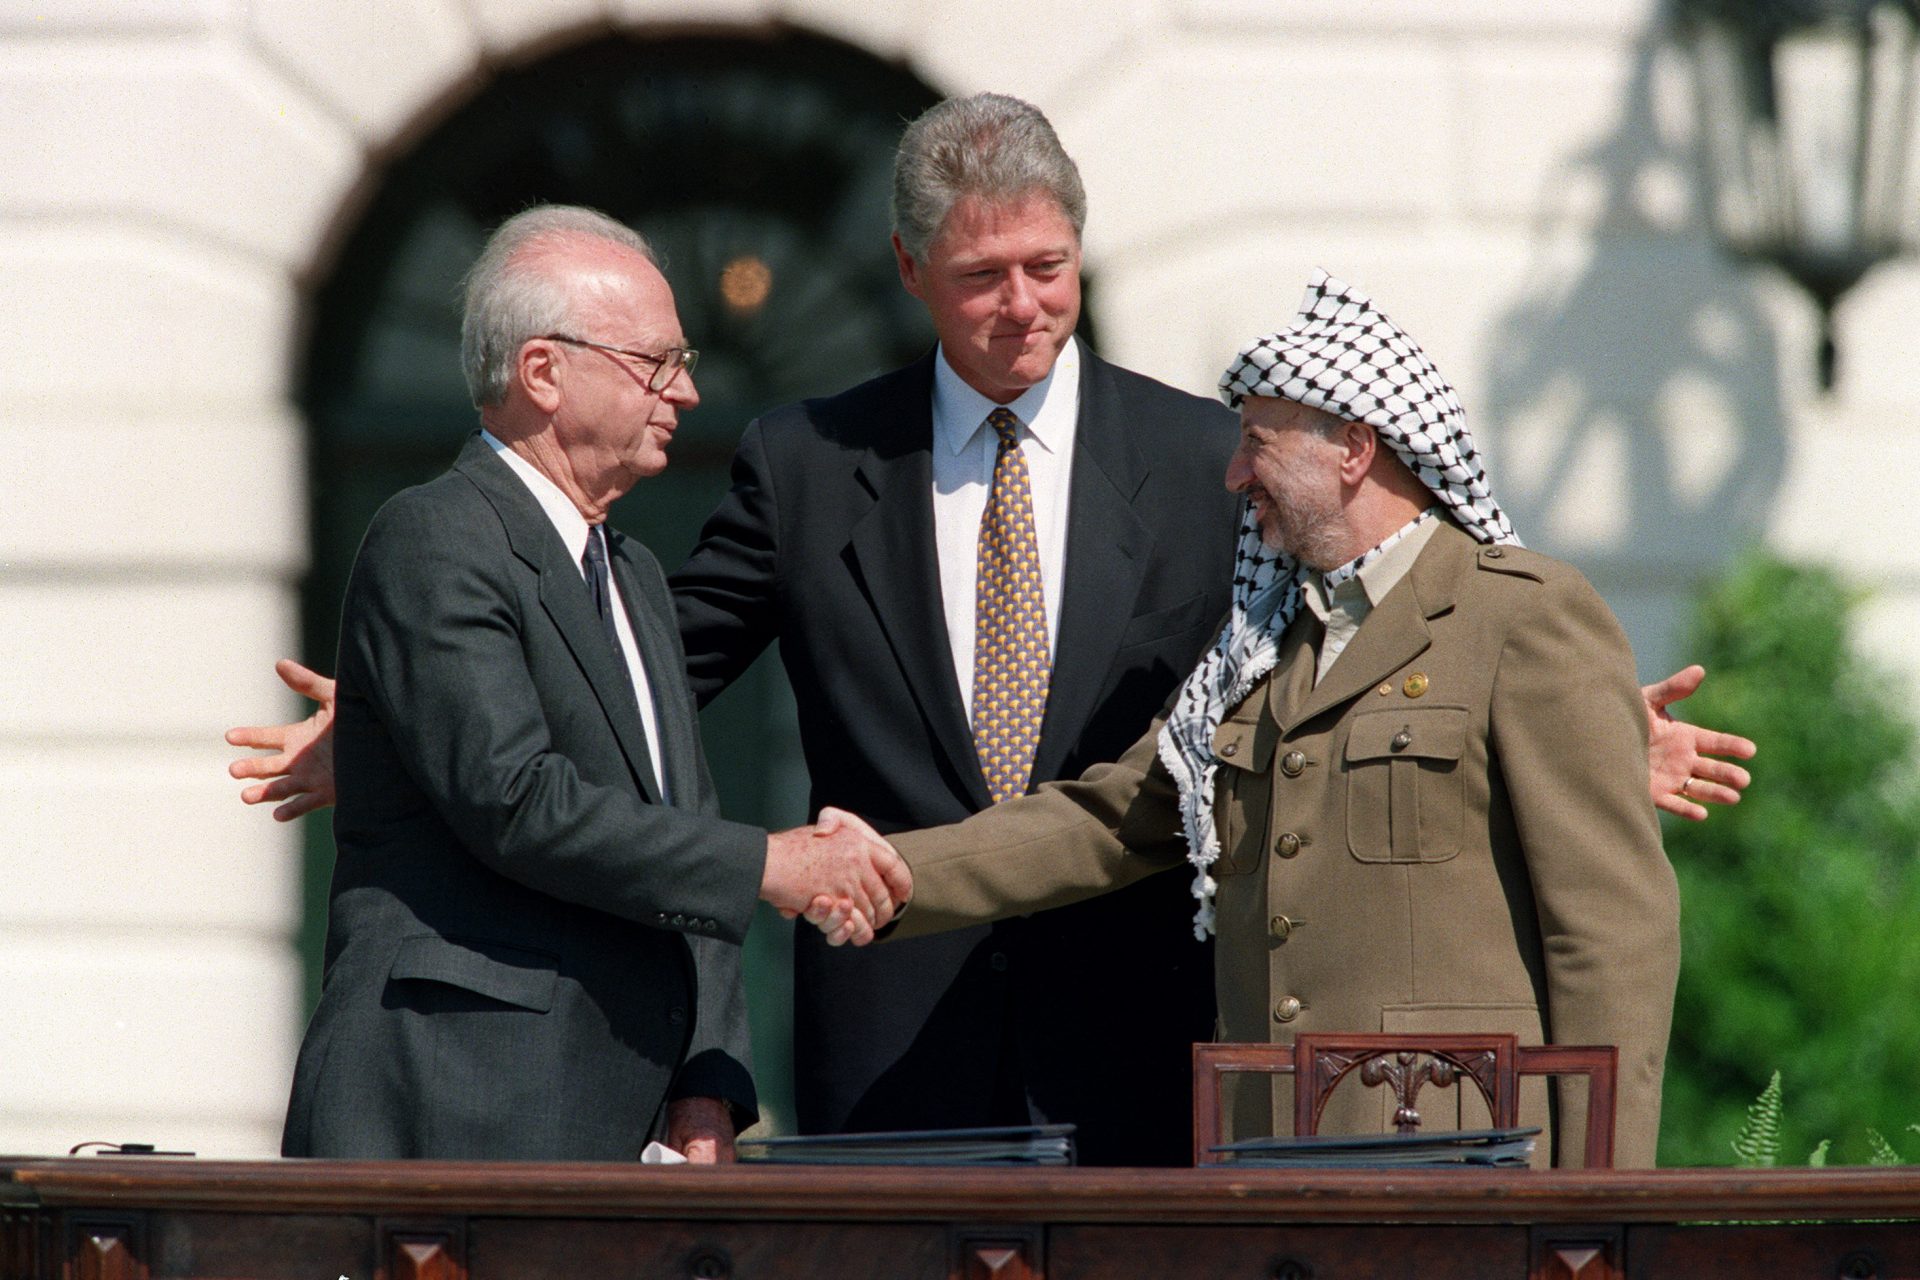 Working towards peace with the Oslo Accords and a two-state solution